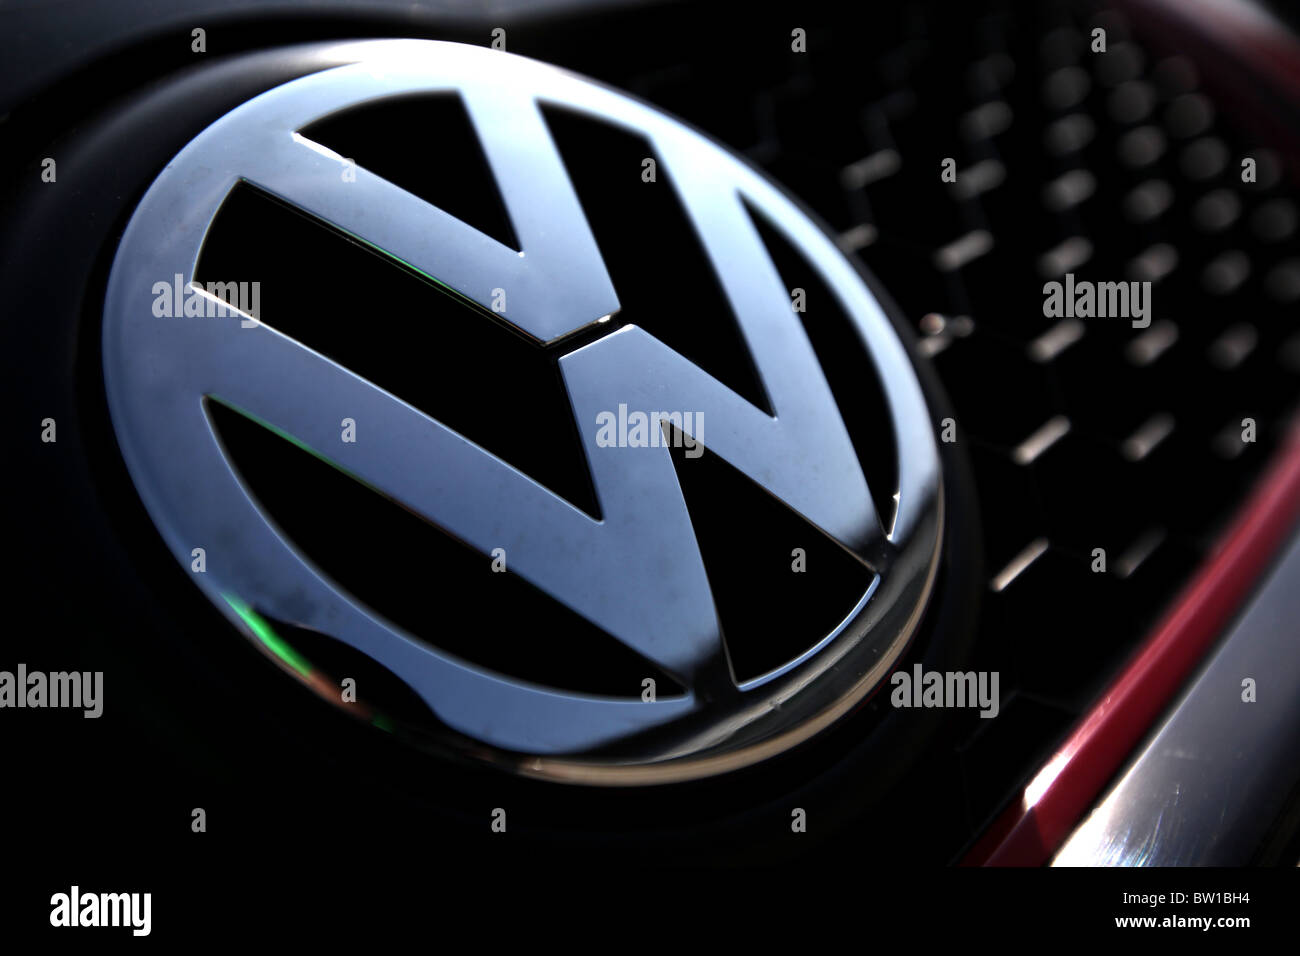 Volkswagen badge or logo on the front grill of a VW Golf Stock